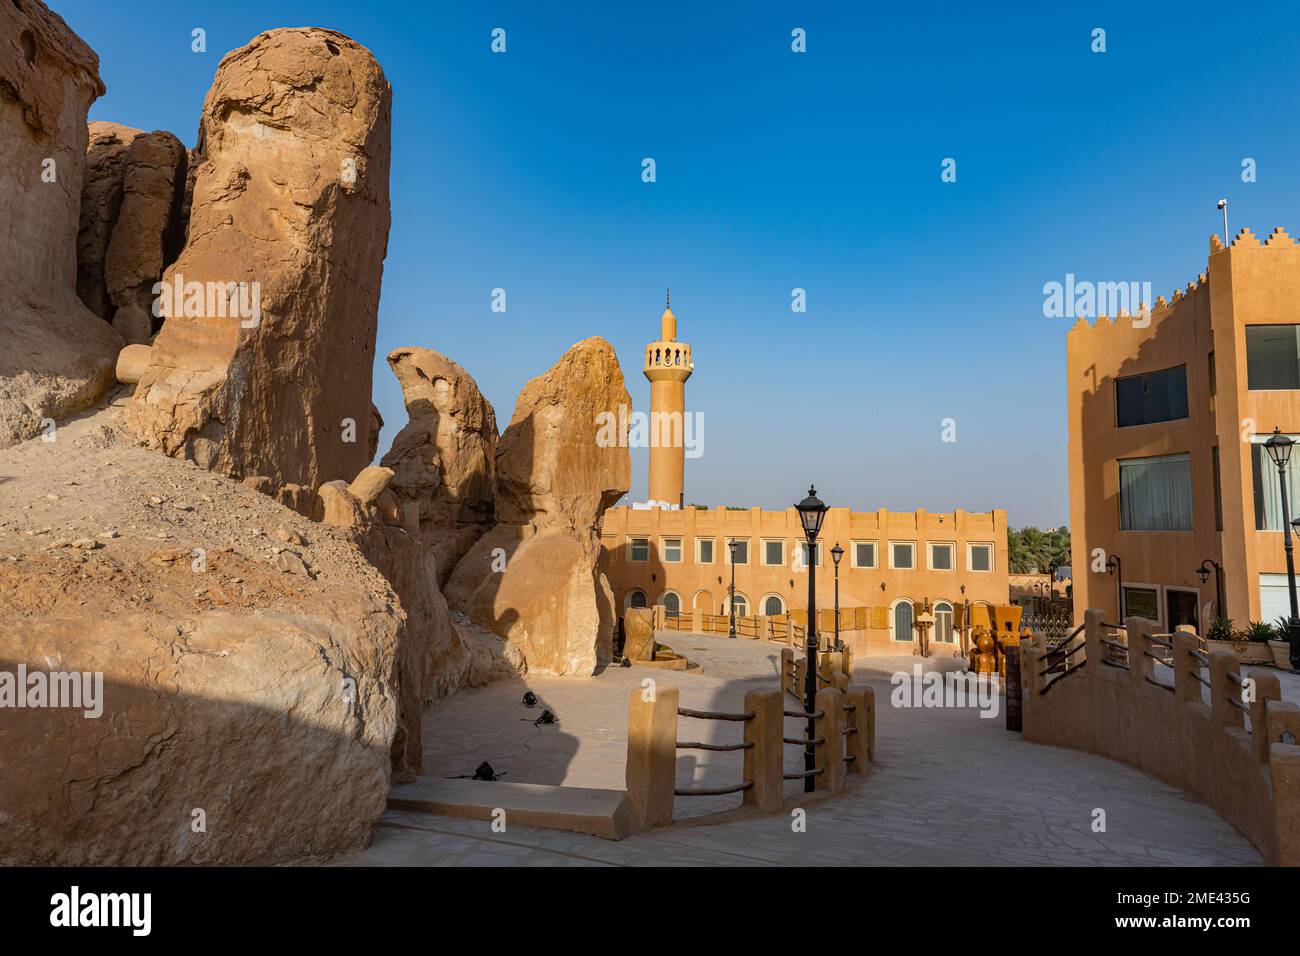 Saudi Arabia, Eastern Province, Al-Hofuf, Sandstone outcrops with mosque in background Stock Photo